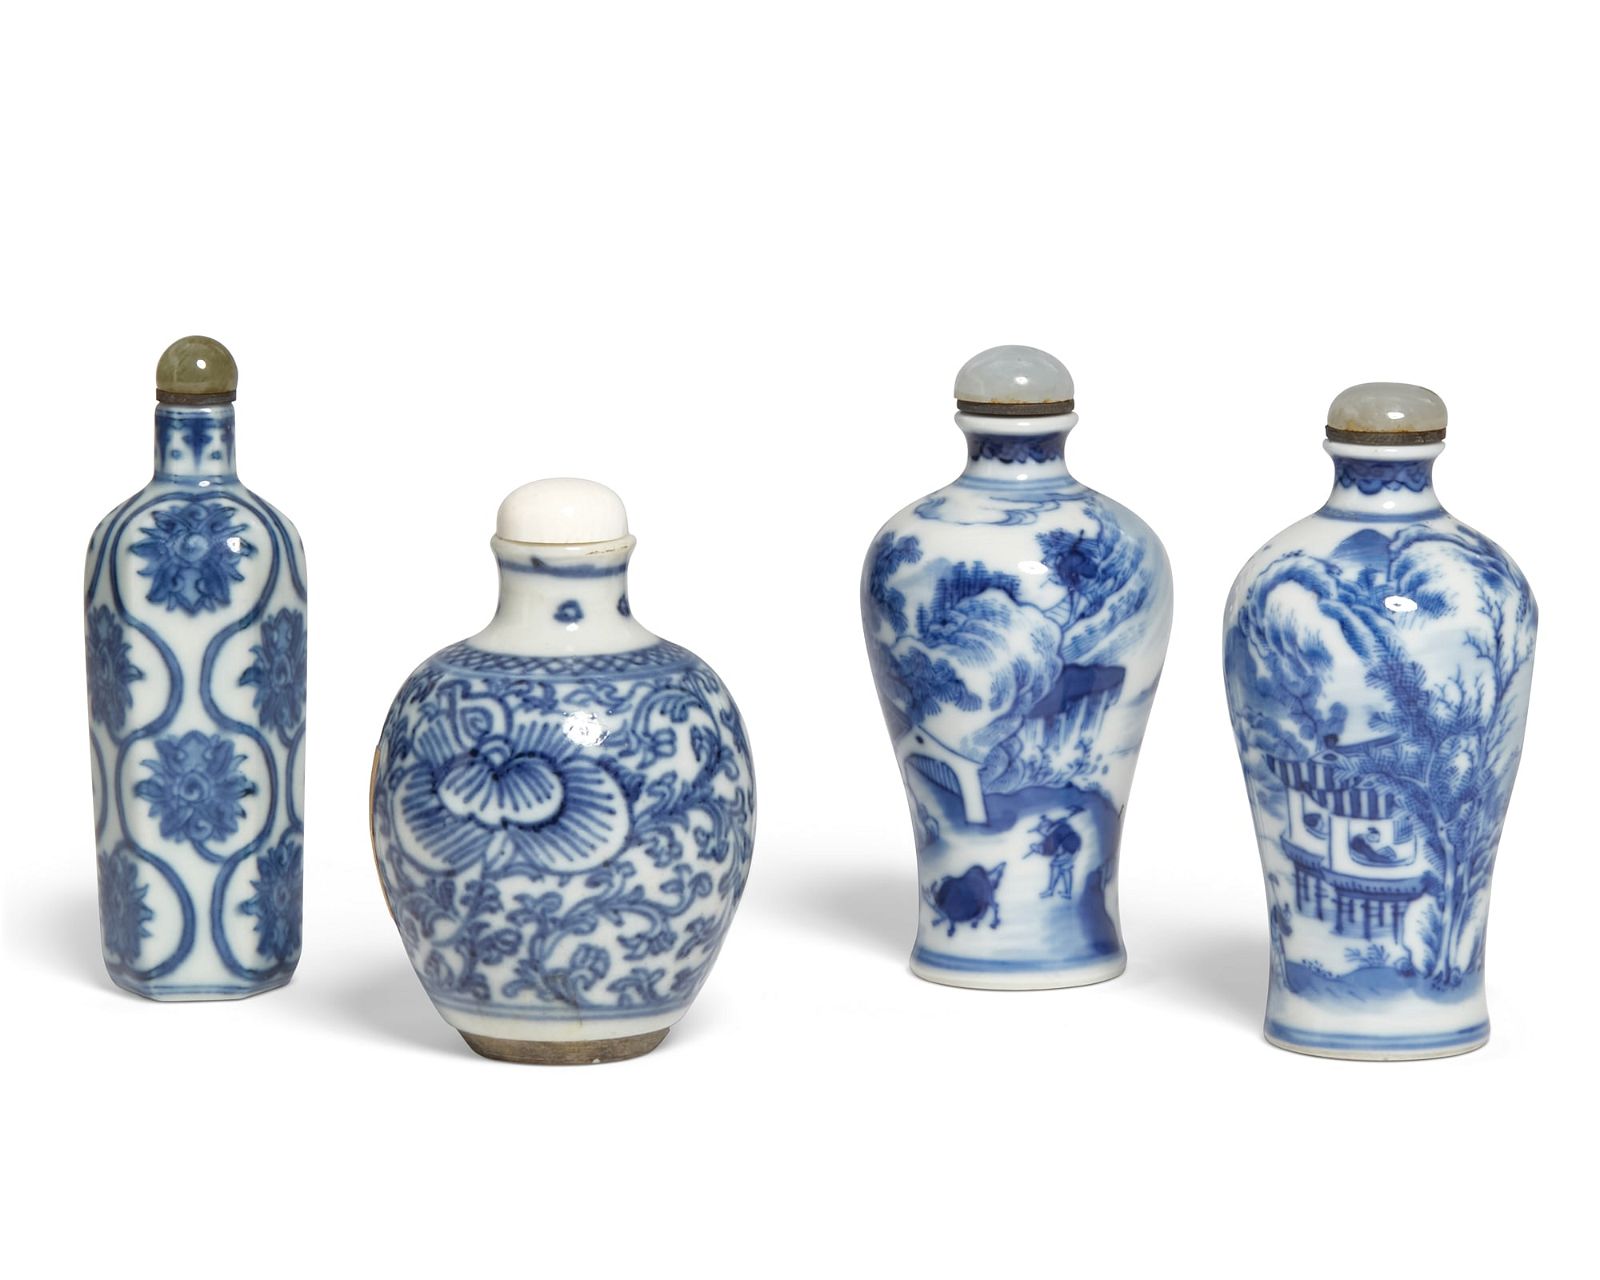 FOUR CHINESE PORCELAIN SNUFF BOTTLESFour 2fb3b6a